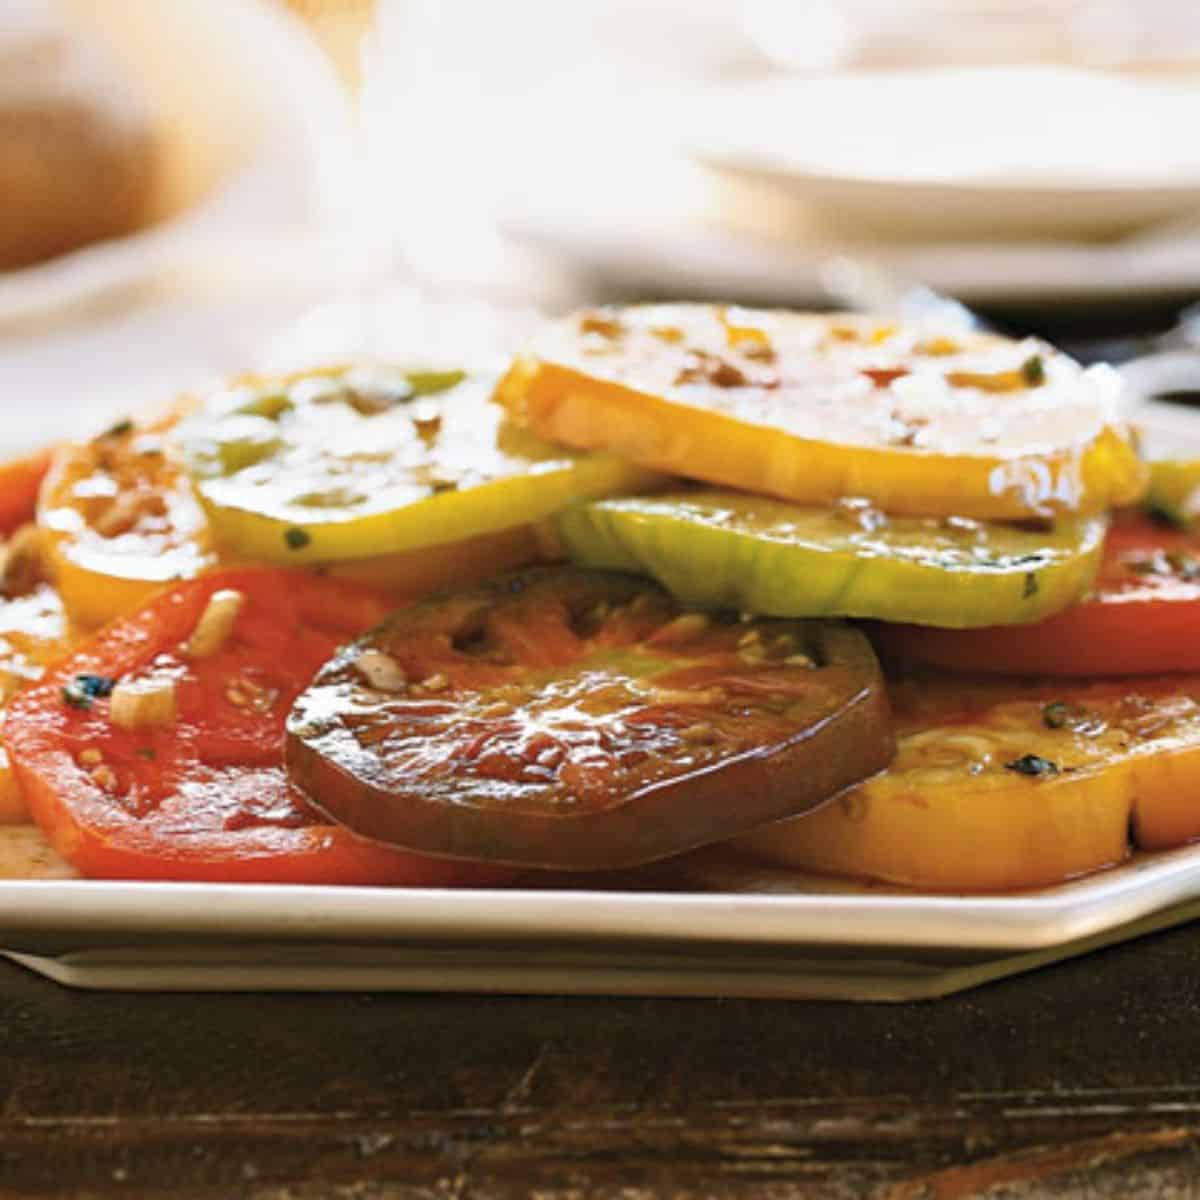 Marinated Heirloom Tomatoes With Tarragon on a white plate.